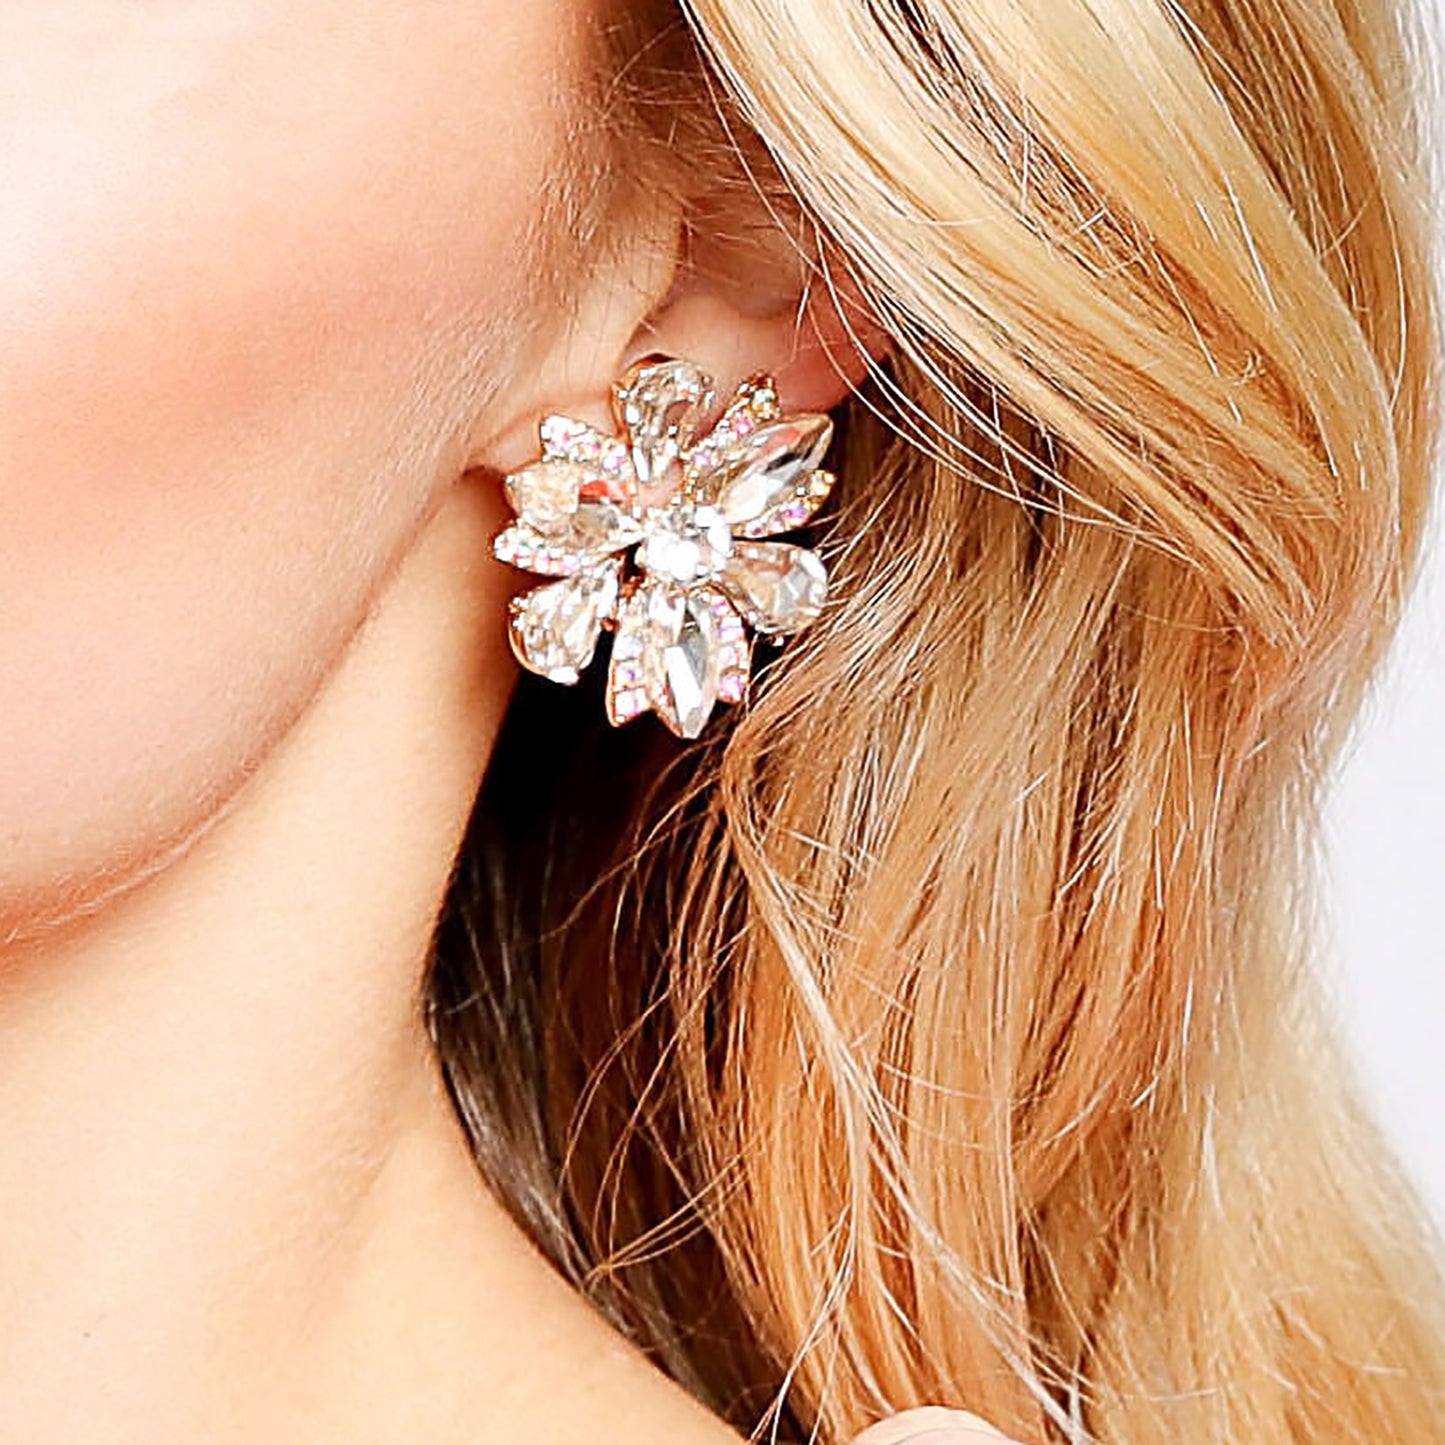 Flora Crystal Clip-on Earrings - Gold